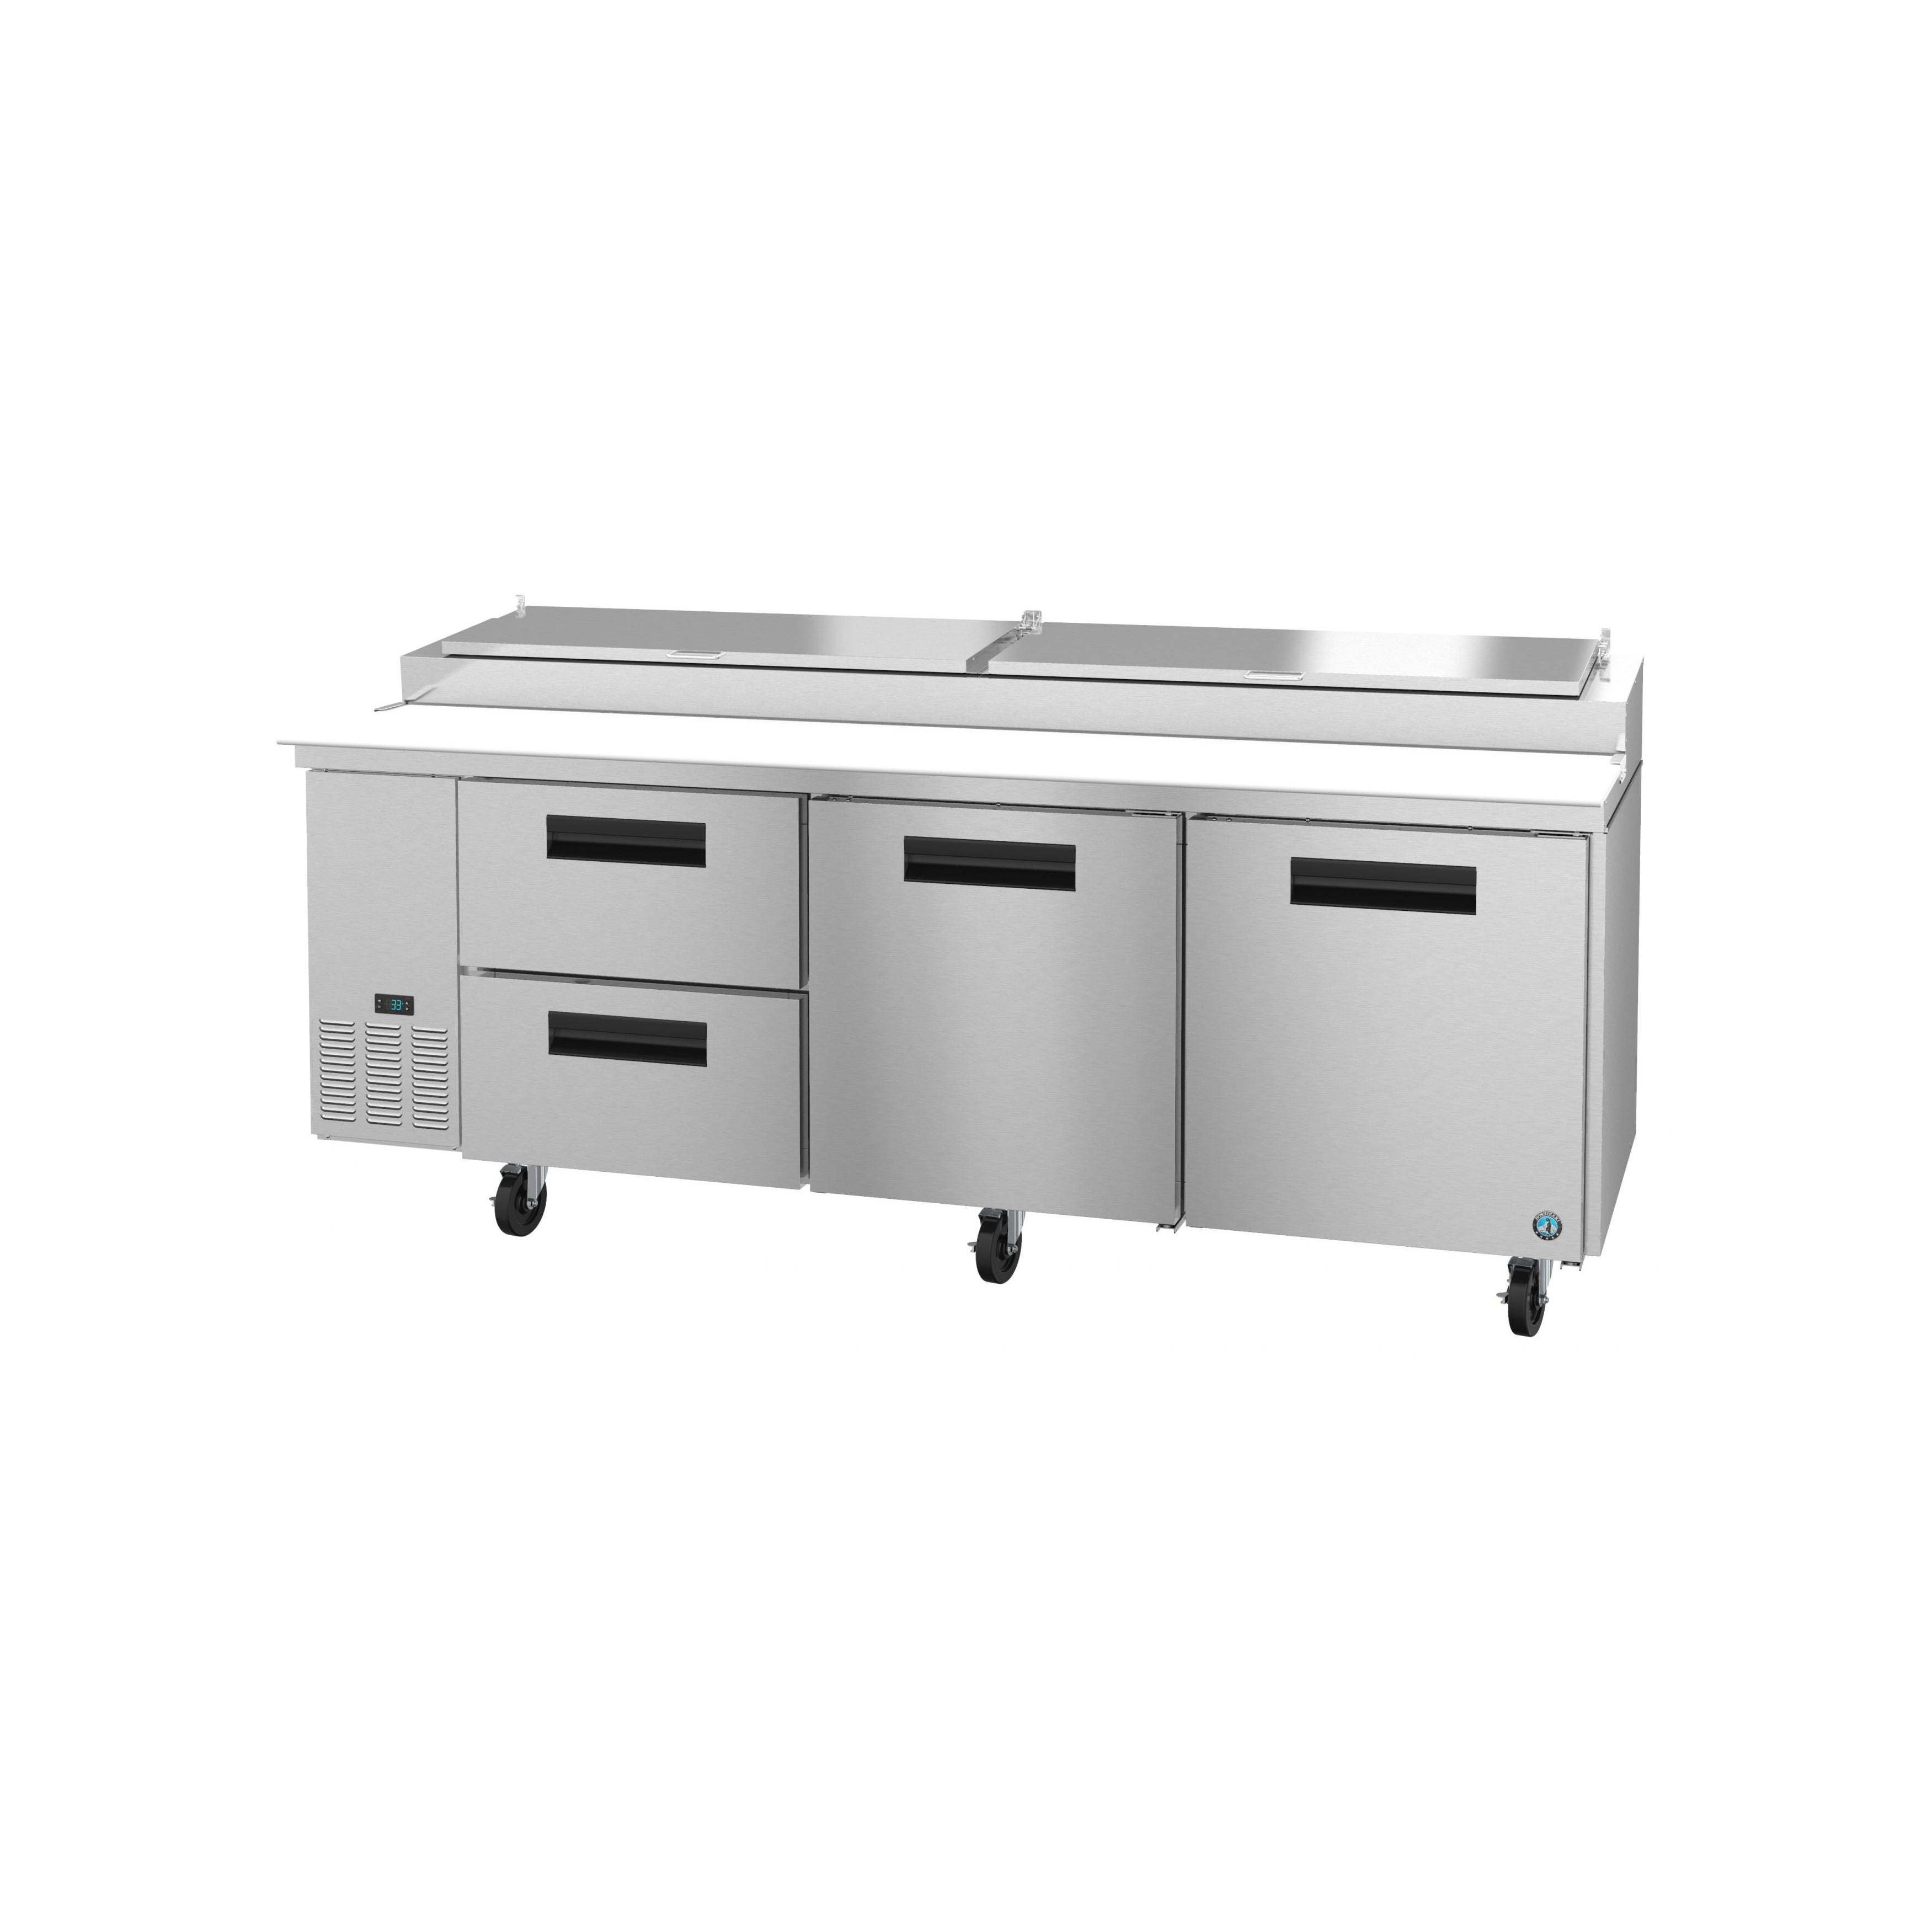 Hoshizaki - PR93A-D2, Commercial 93" Three Section Pizza Prep Table, Drawer Door Combo 30cu.ft.